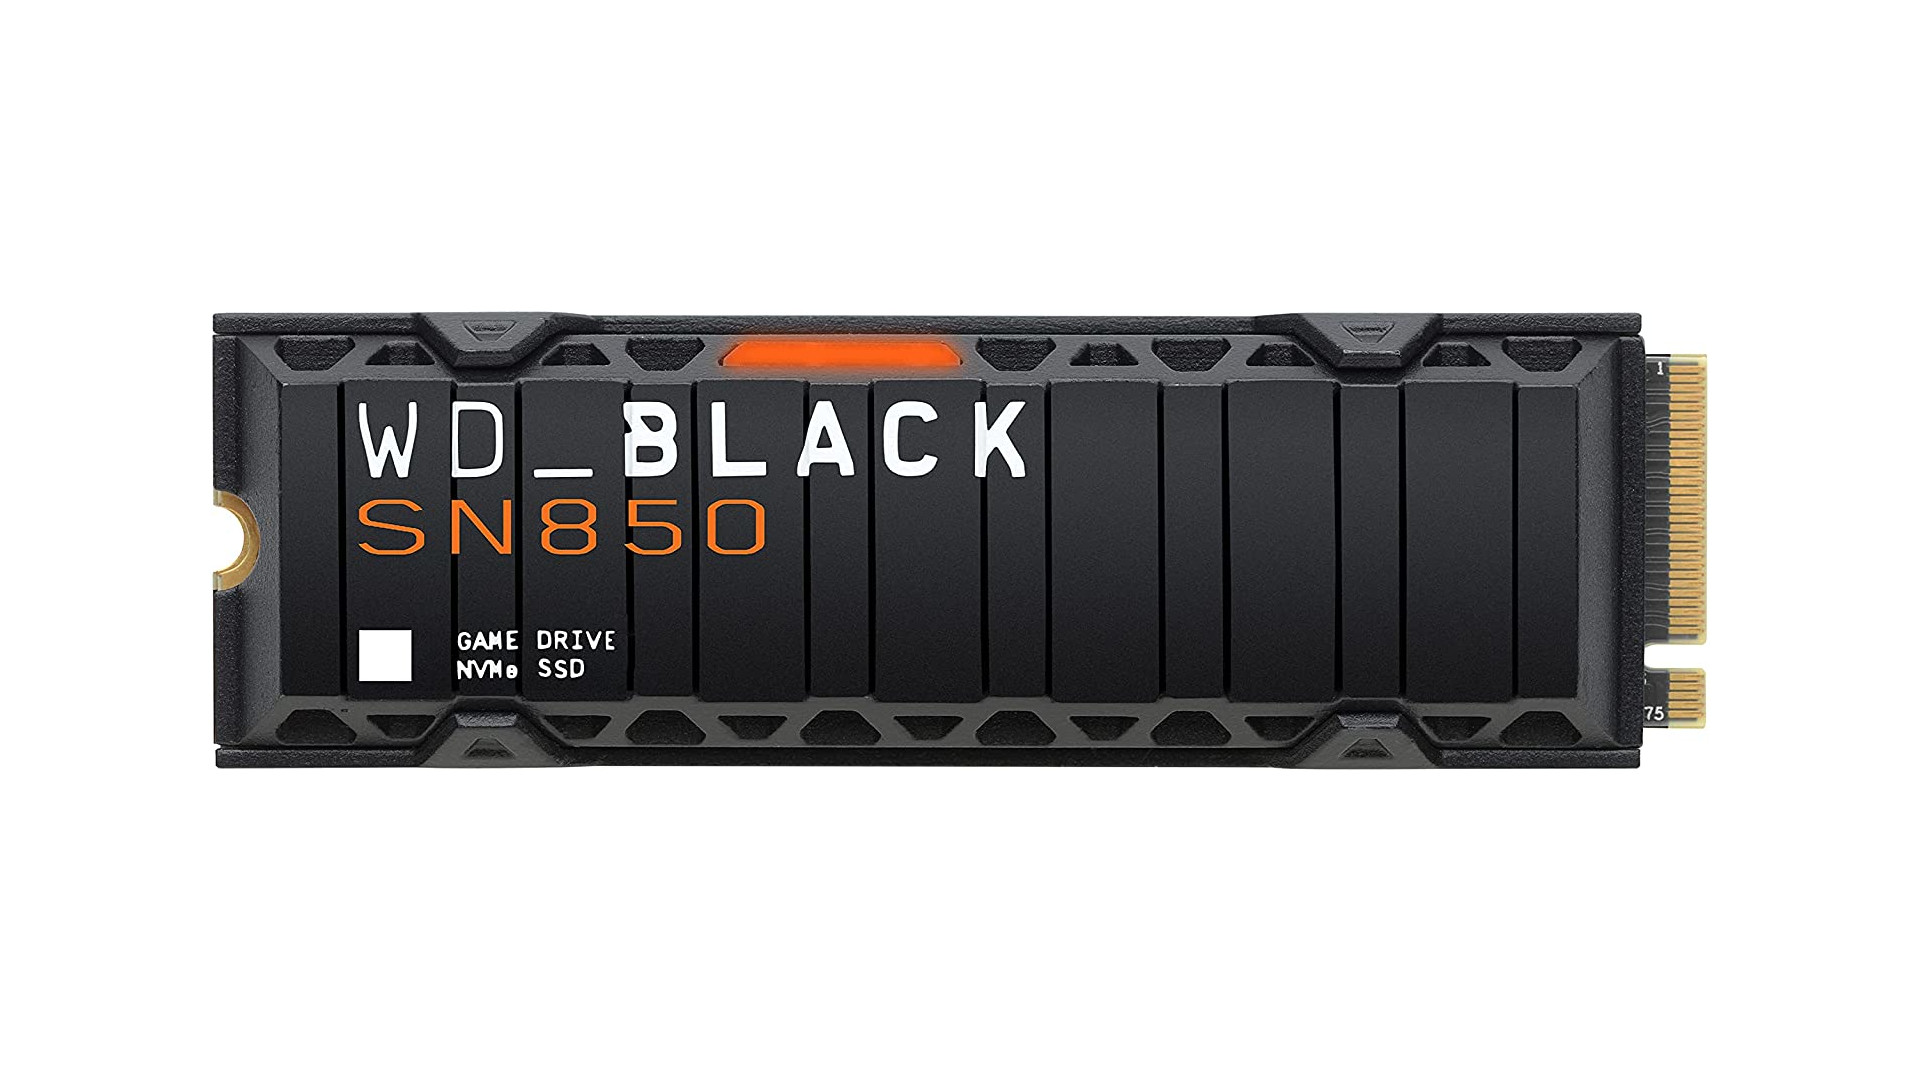 The WD Black SN850 gaming SSD